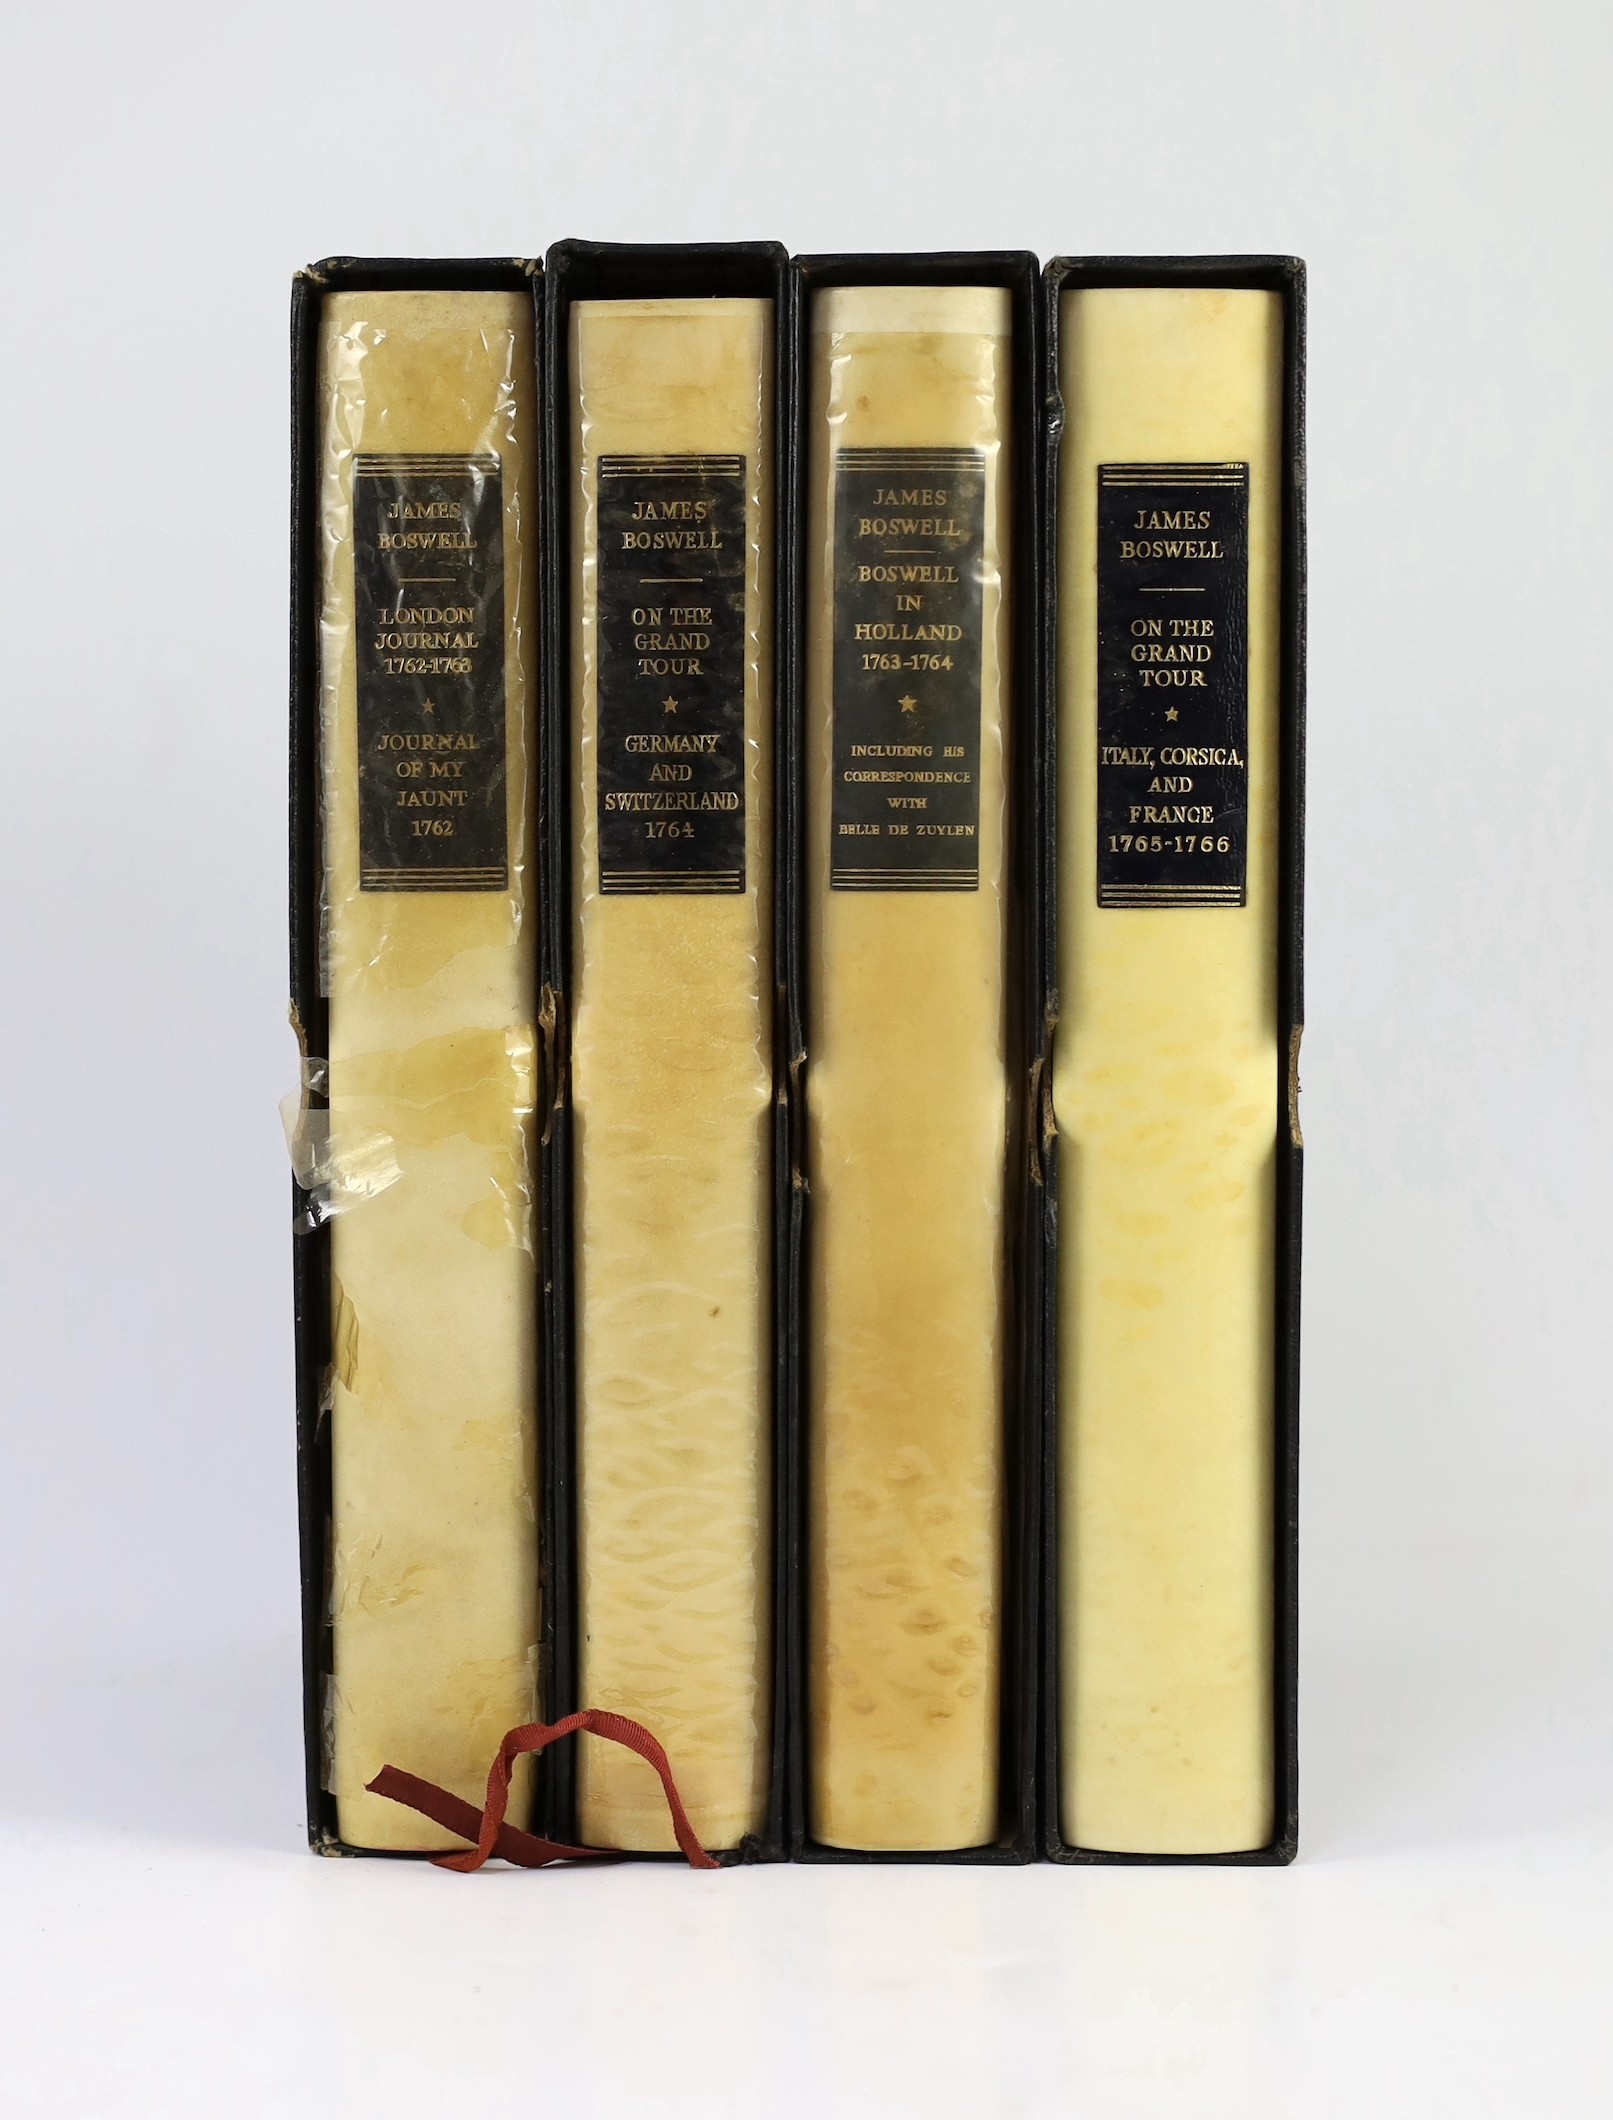 Boswell, James - The Yale Edition of the Private Papers ... Limited Editions, 4 vols, i.e., Boswell's London Journal; Boswell in Holland; Boswell on the Grand Tour; Germany and Switzerland ..., Boswell on the Grand Tour: